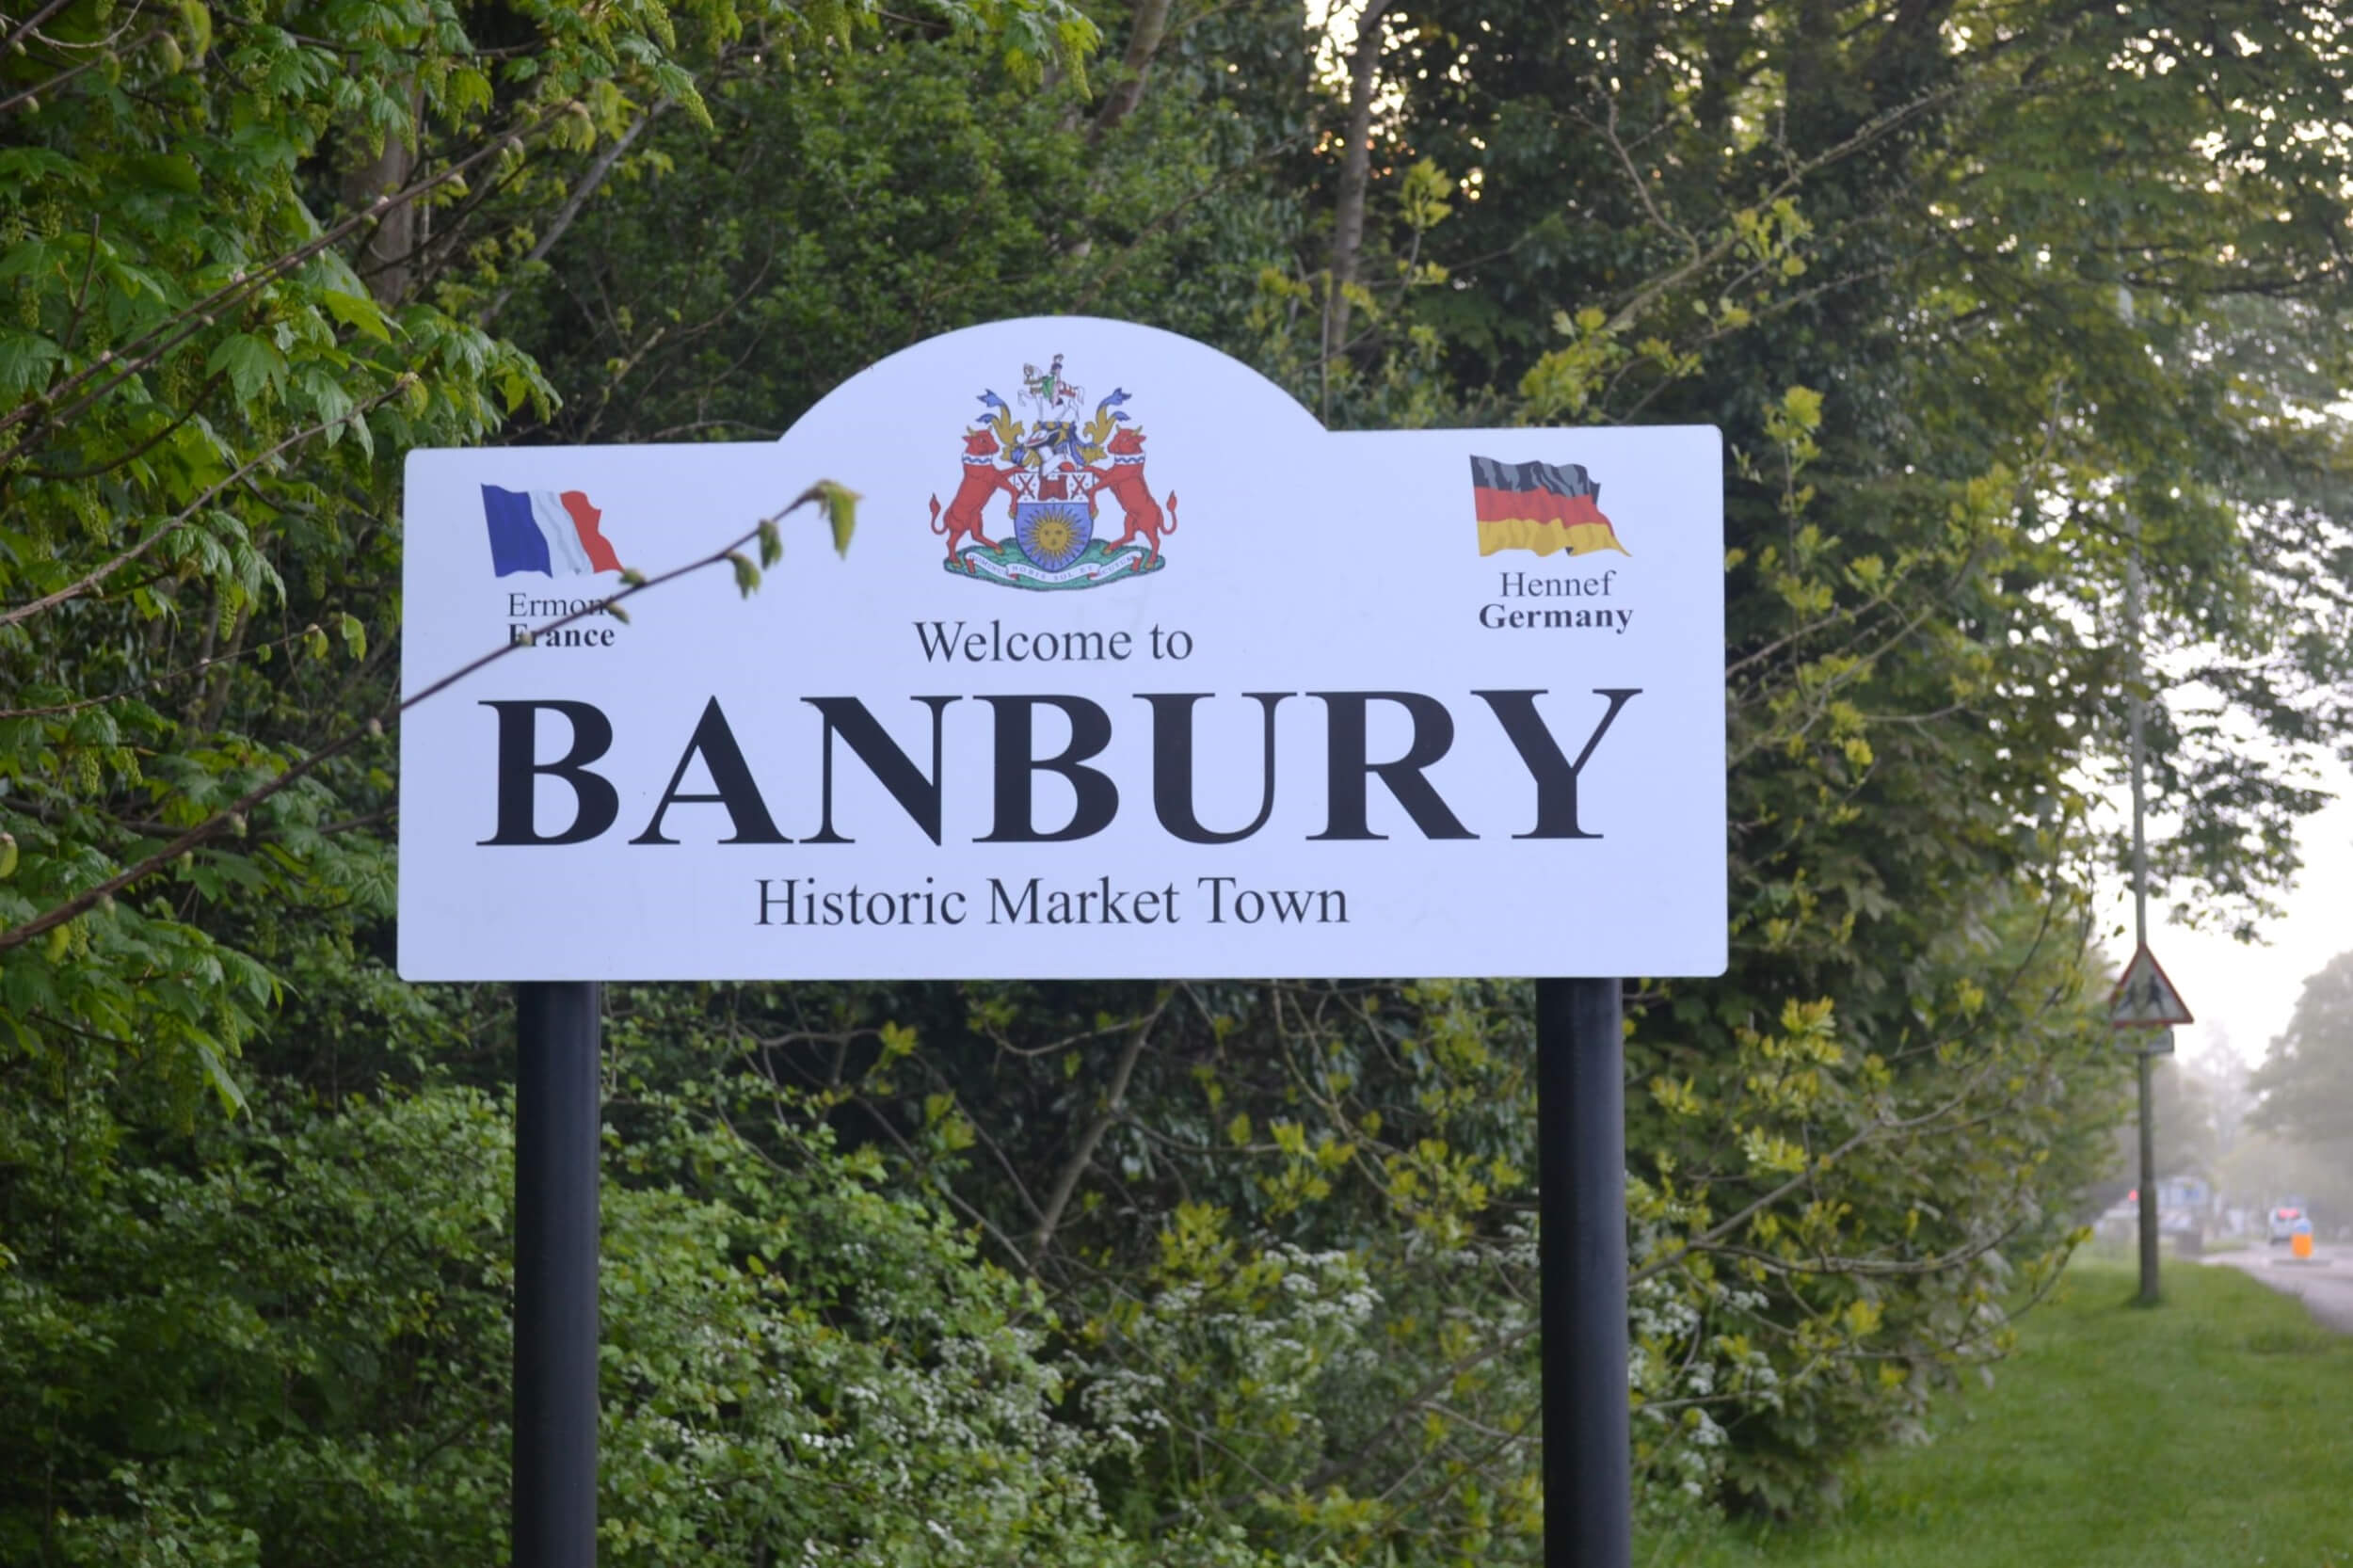 Travelling to Banbury this weekend?